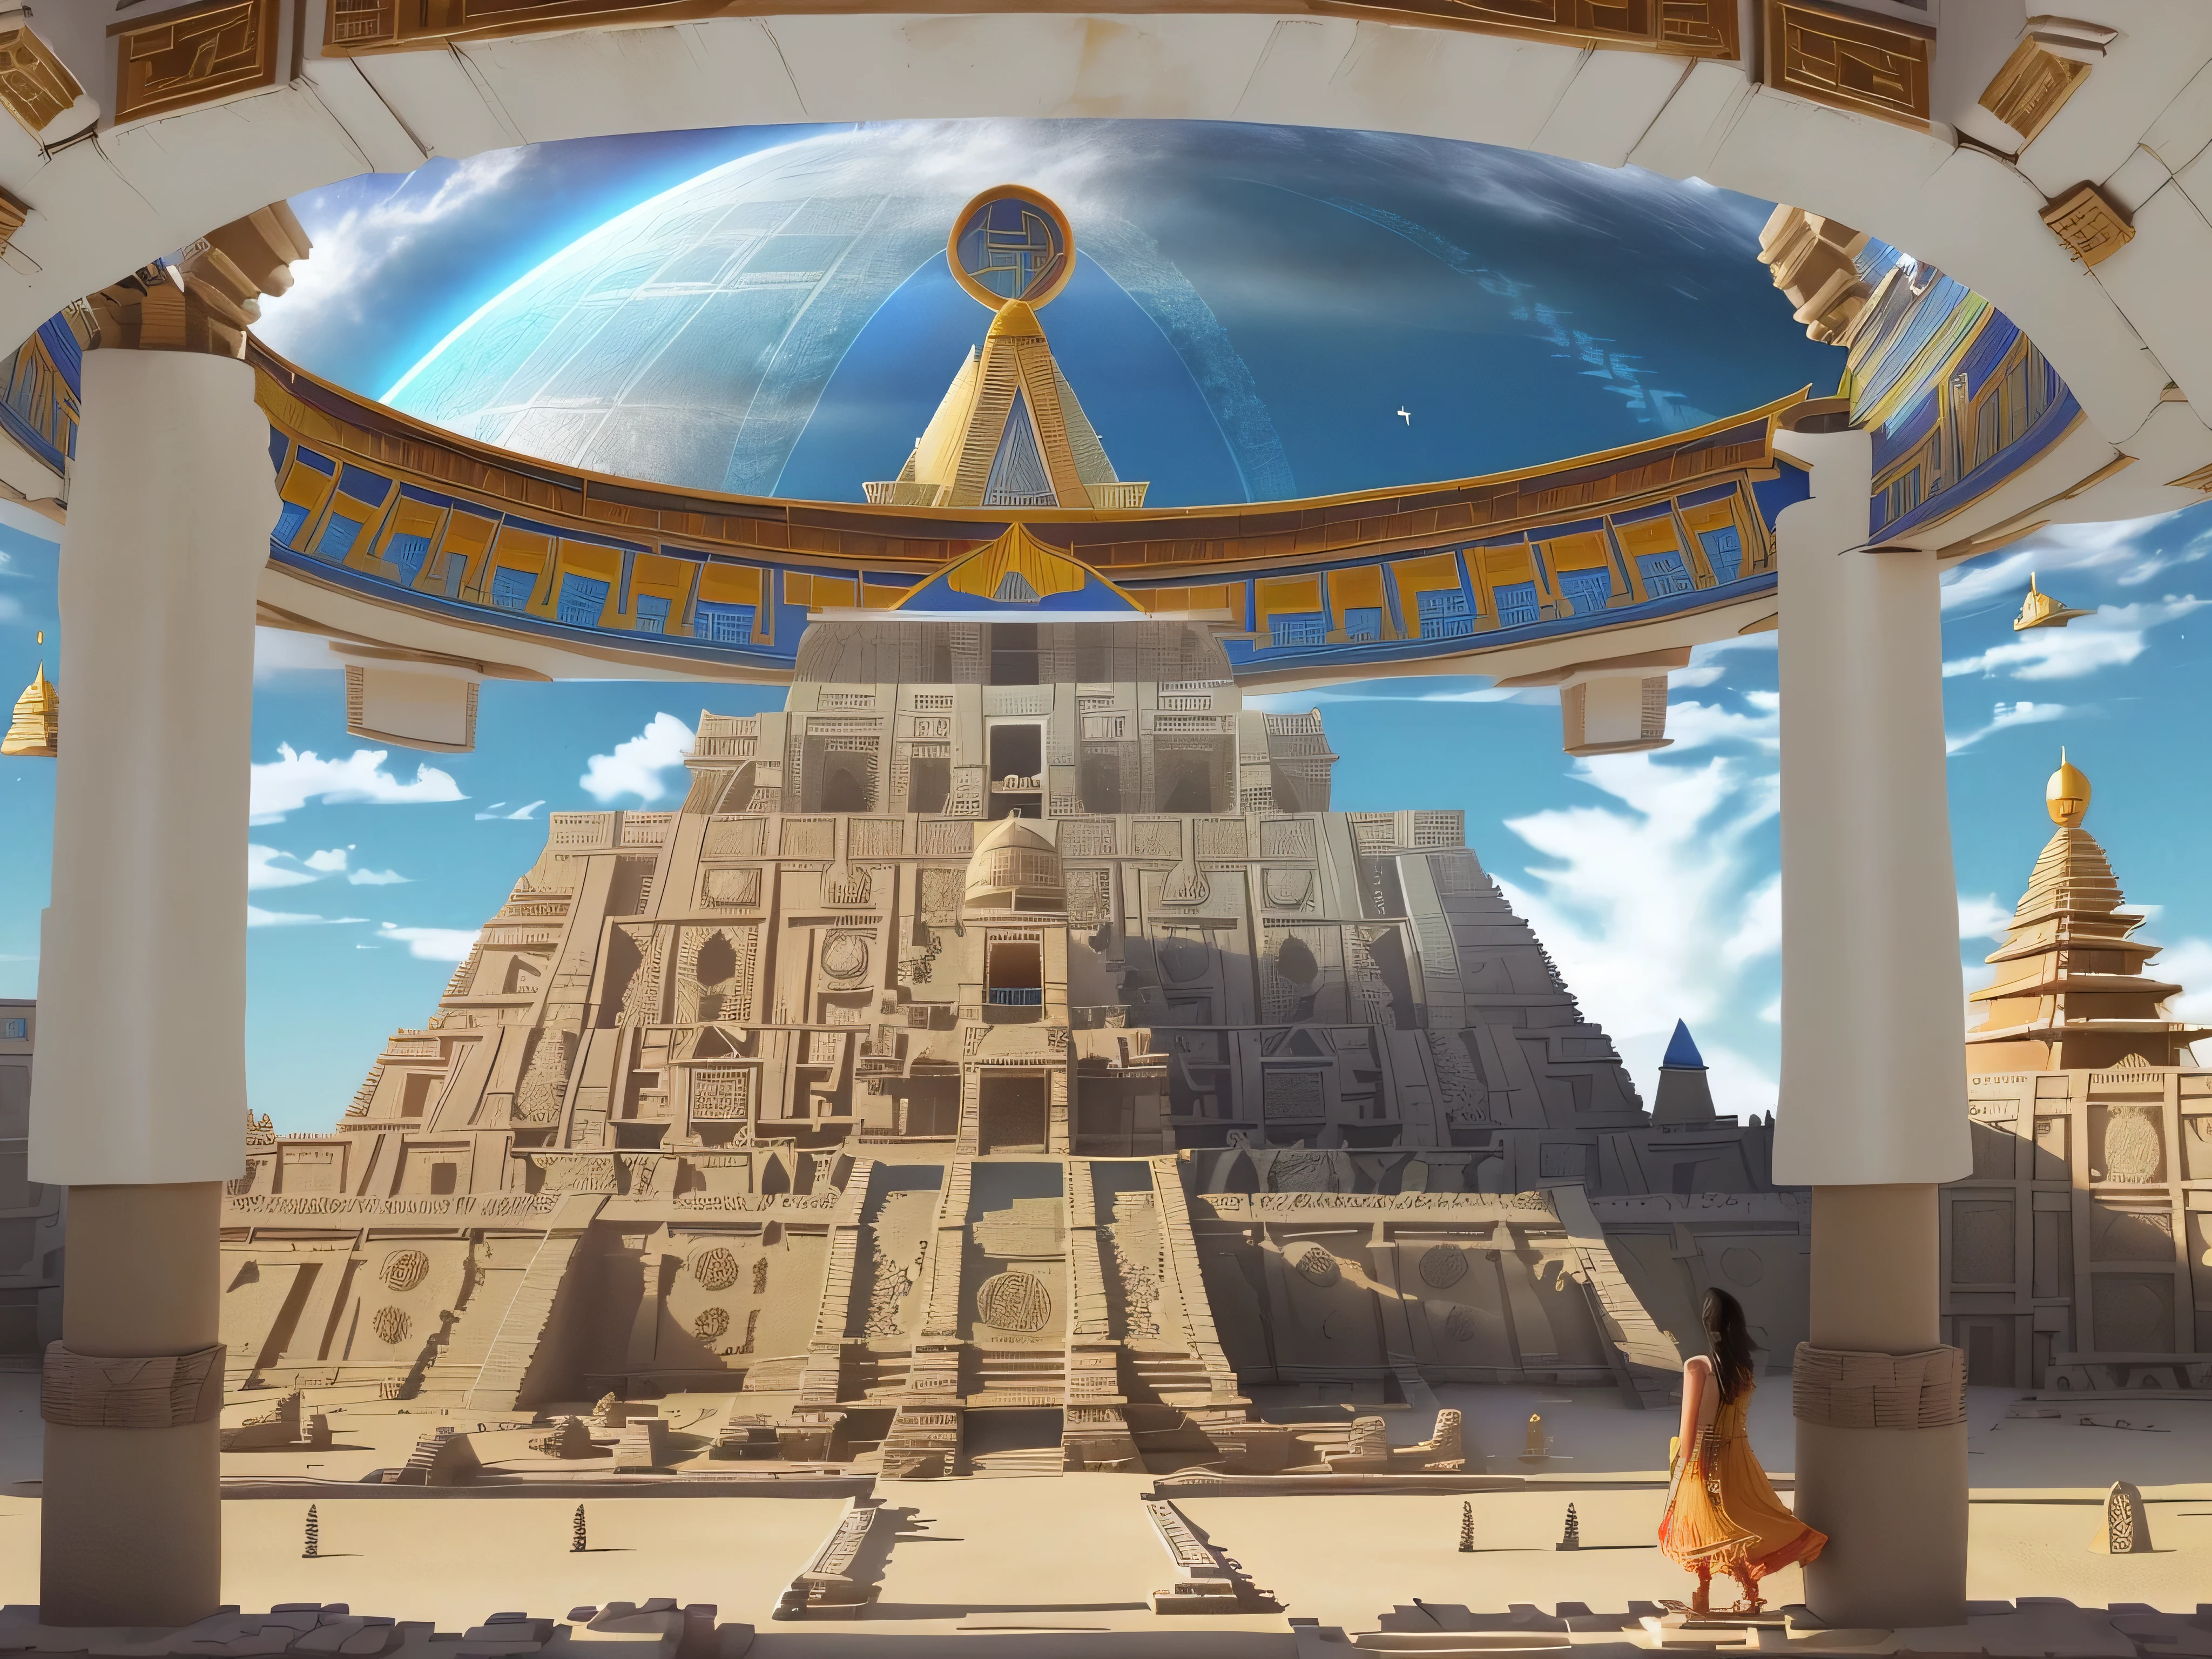 there is a woman standing in front of a pyramid with a pyramid in the background, ancient megastructure pyramid, pyramid portal, giant aztec spaceship, giant aztec space city, interplanetary cathedral, exterior of scifi temple, dmt temple, galactic temple, dome of wonders, in a futuristic desert palace, futuristic persian palace, cosmic architecture, ancient yet futuristic